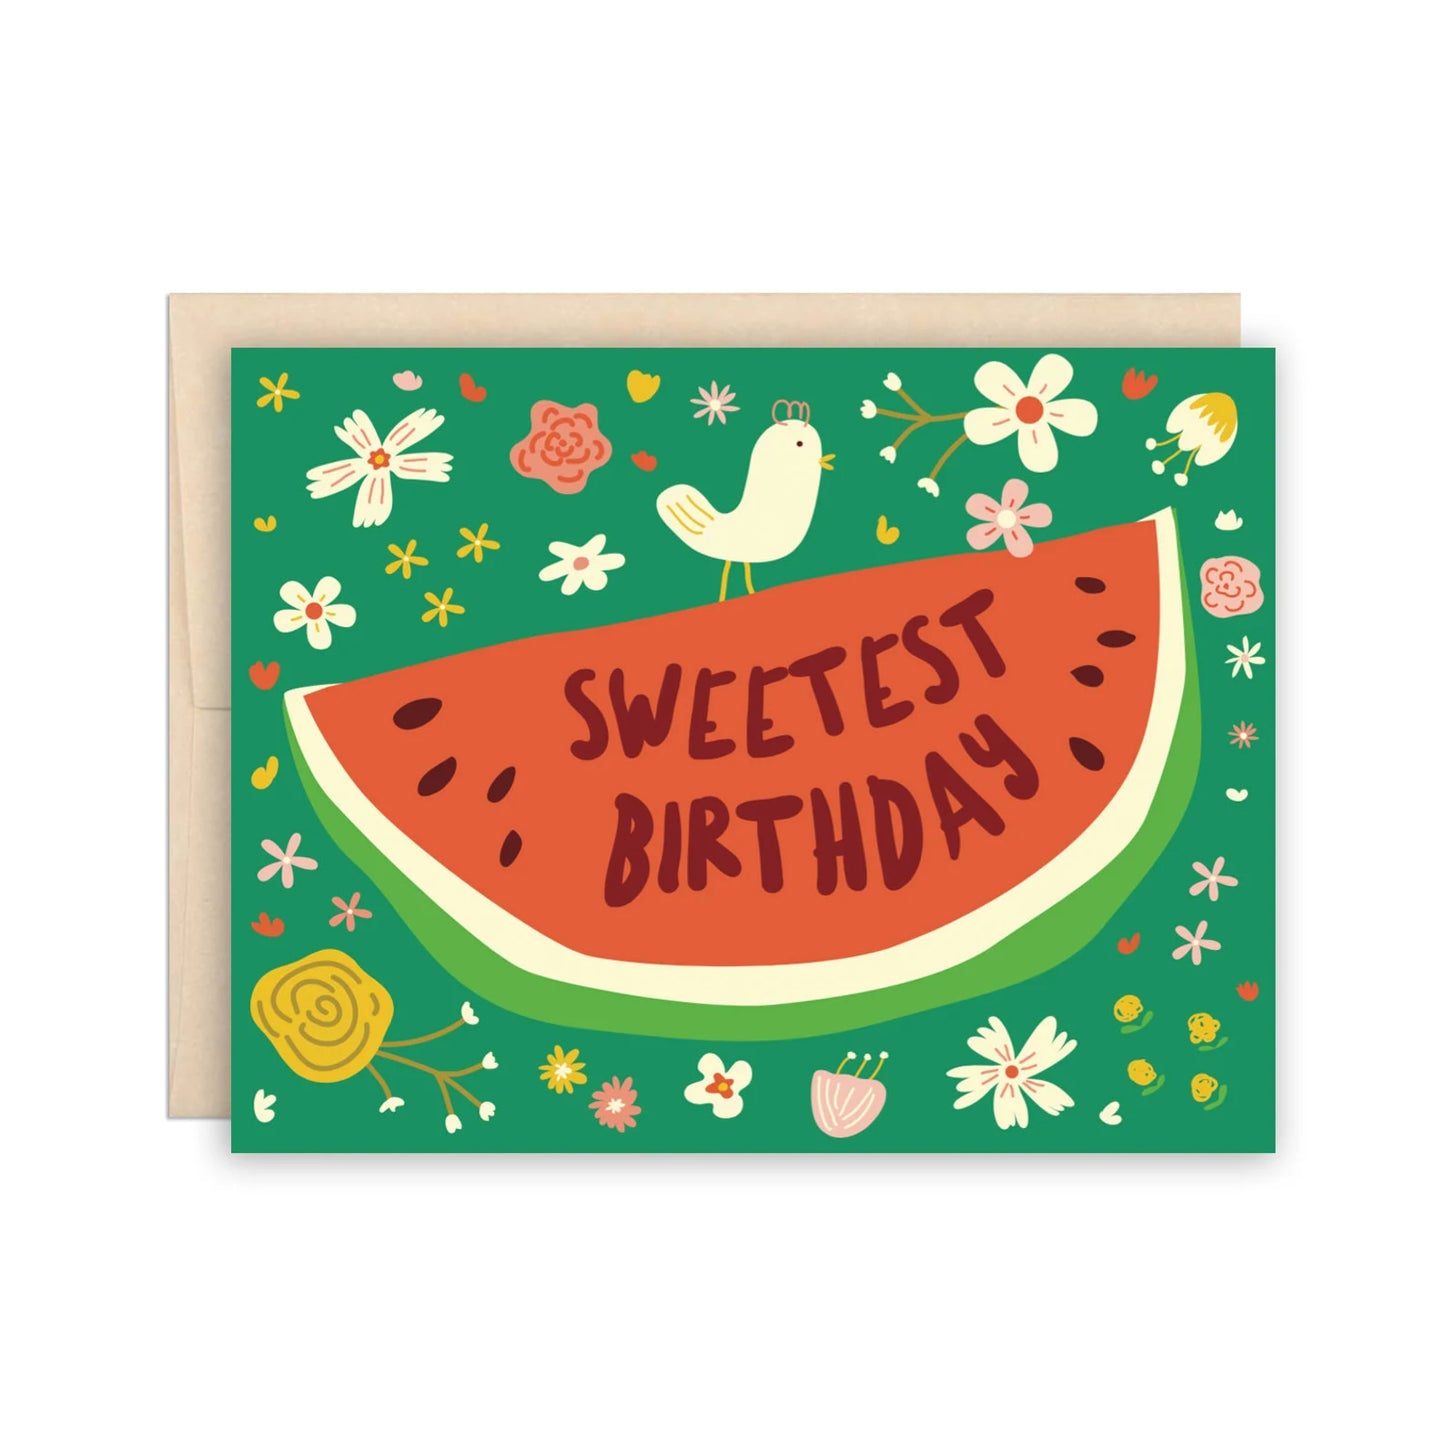 The Beautiful Project - Sweetest Birthday